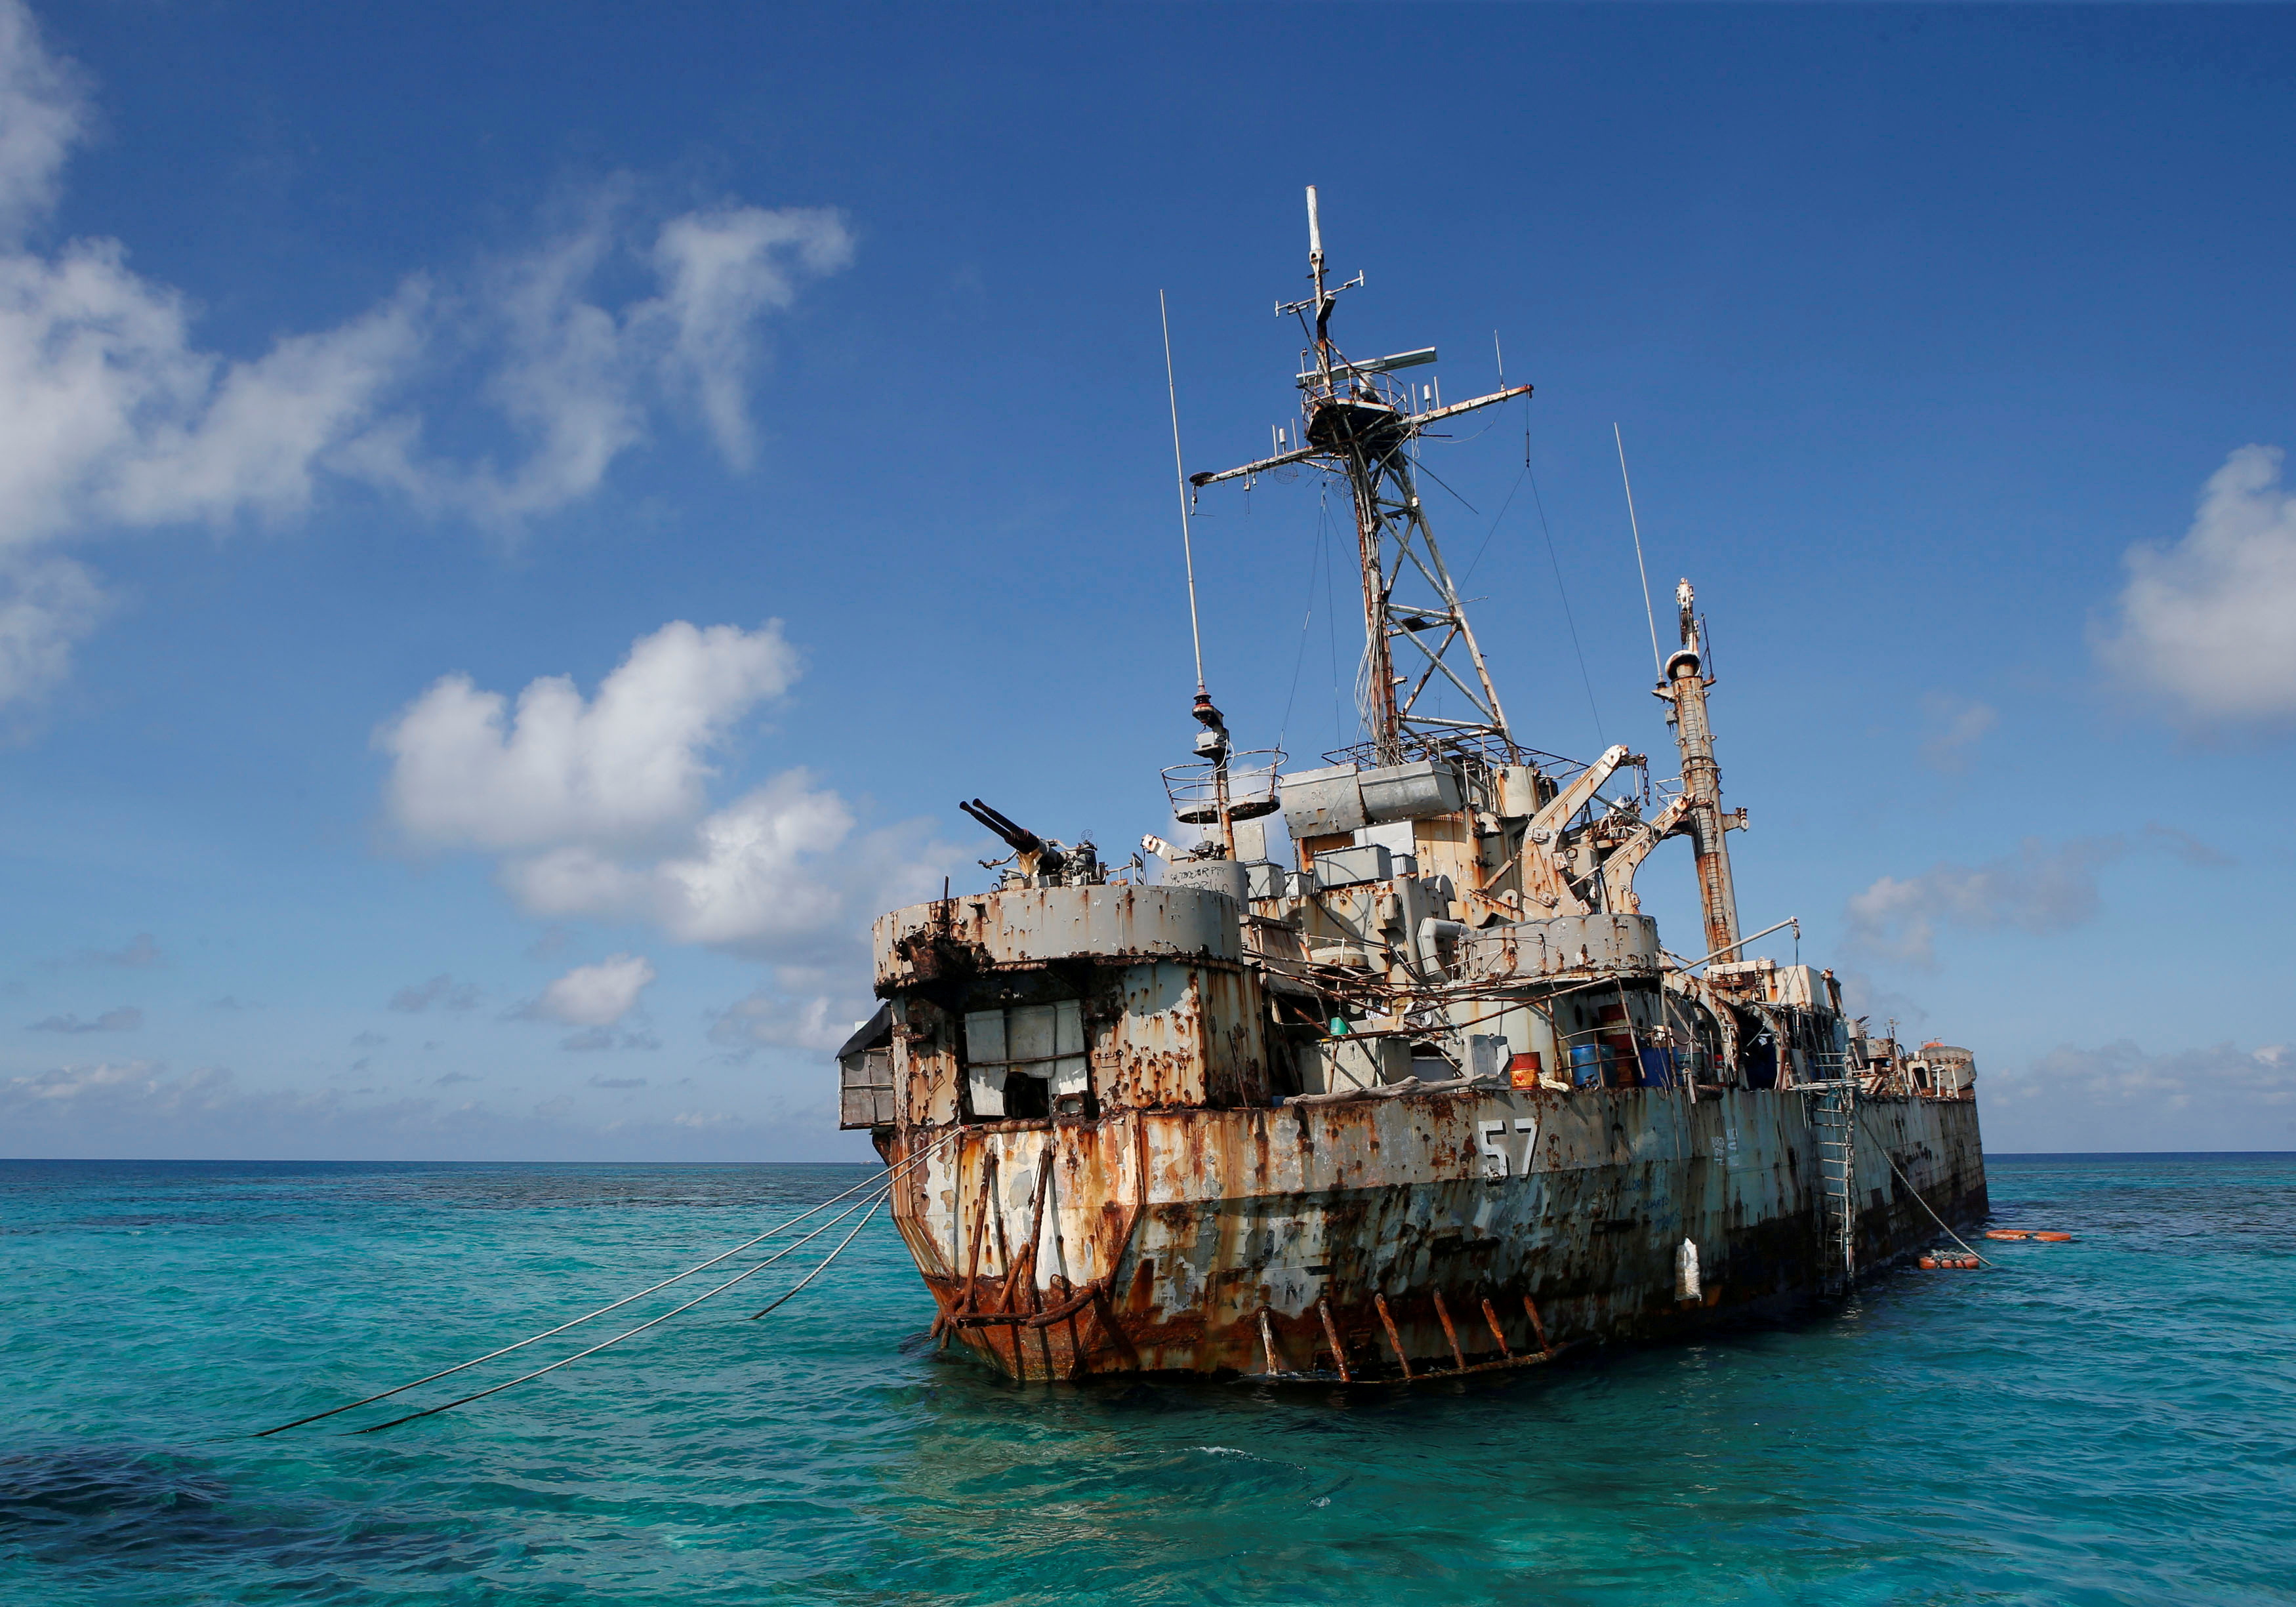 The BRP Sierra Madre, a marooned transport ship which Philippine Marines live on as a military outpost, is pictured in the disputed Second Thomas Shoal